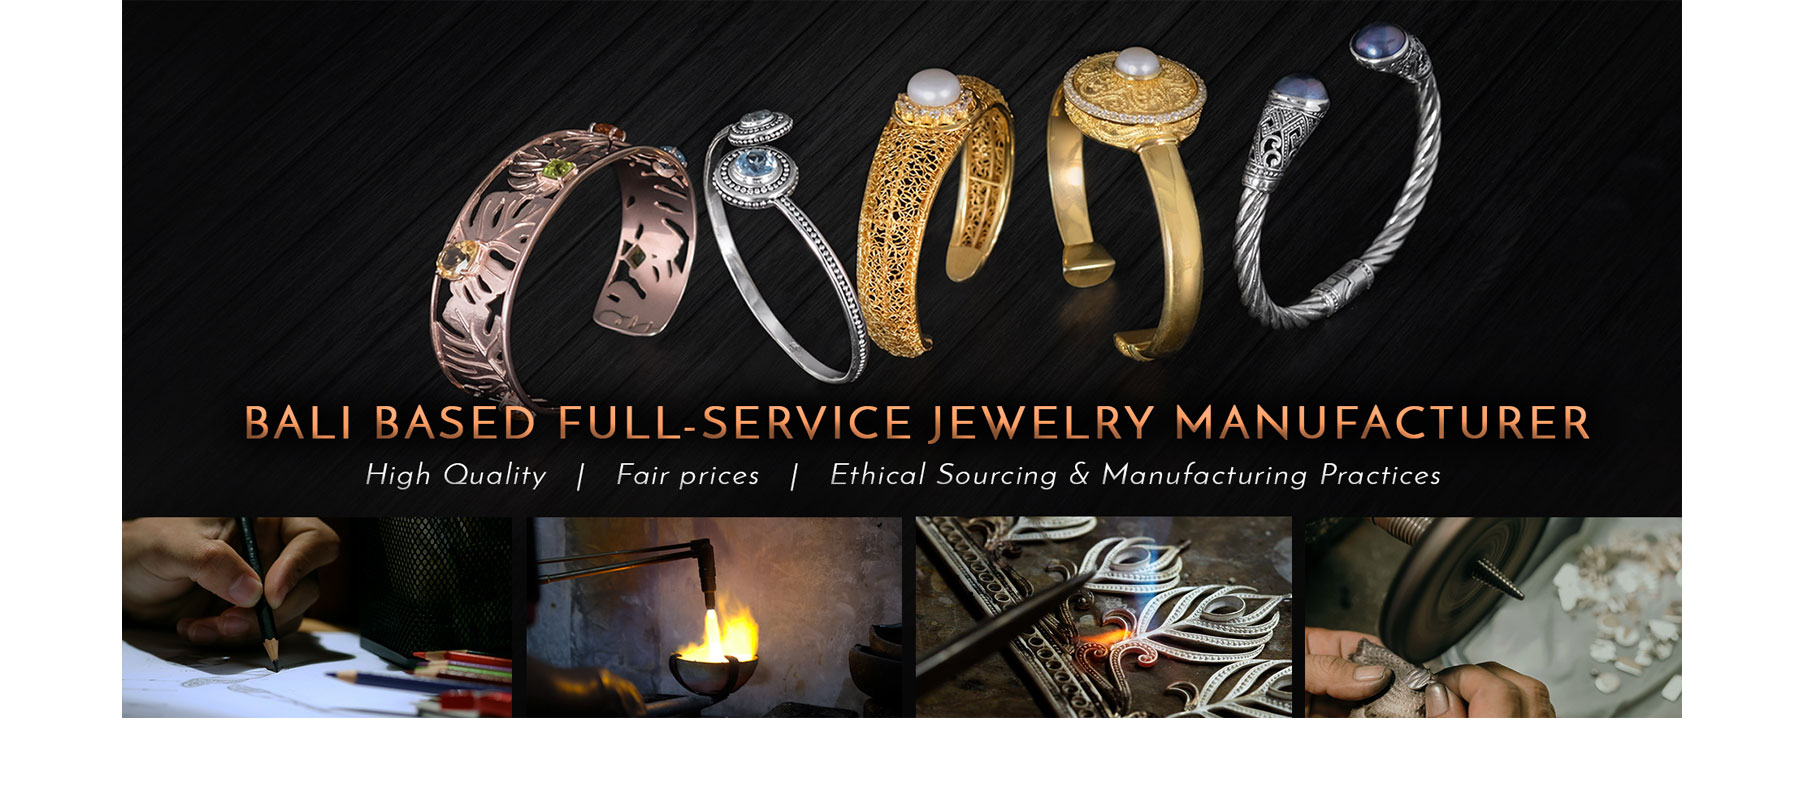 Bali Based Full Service Jewelry Manufacturing